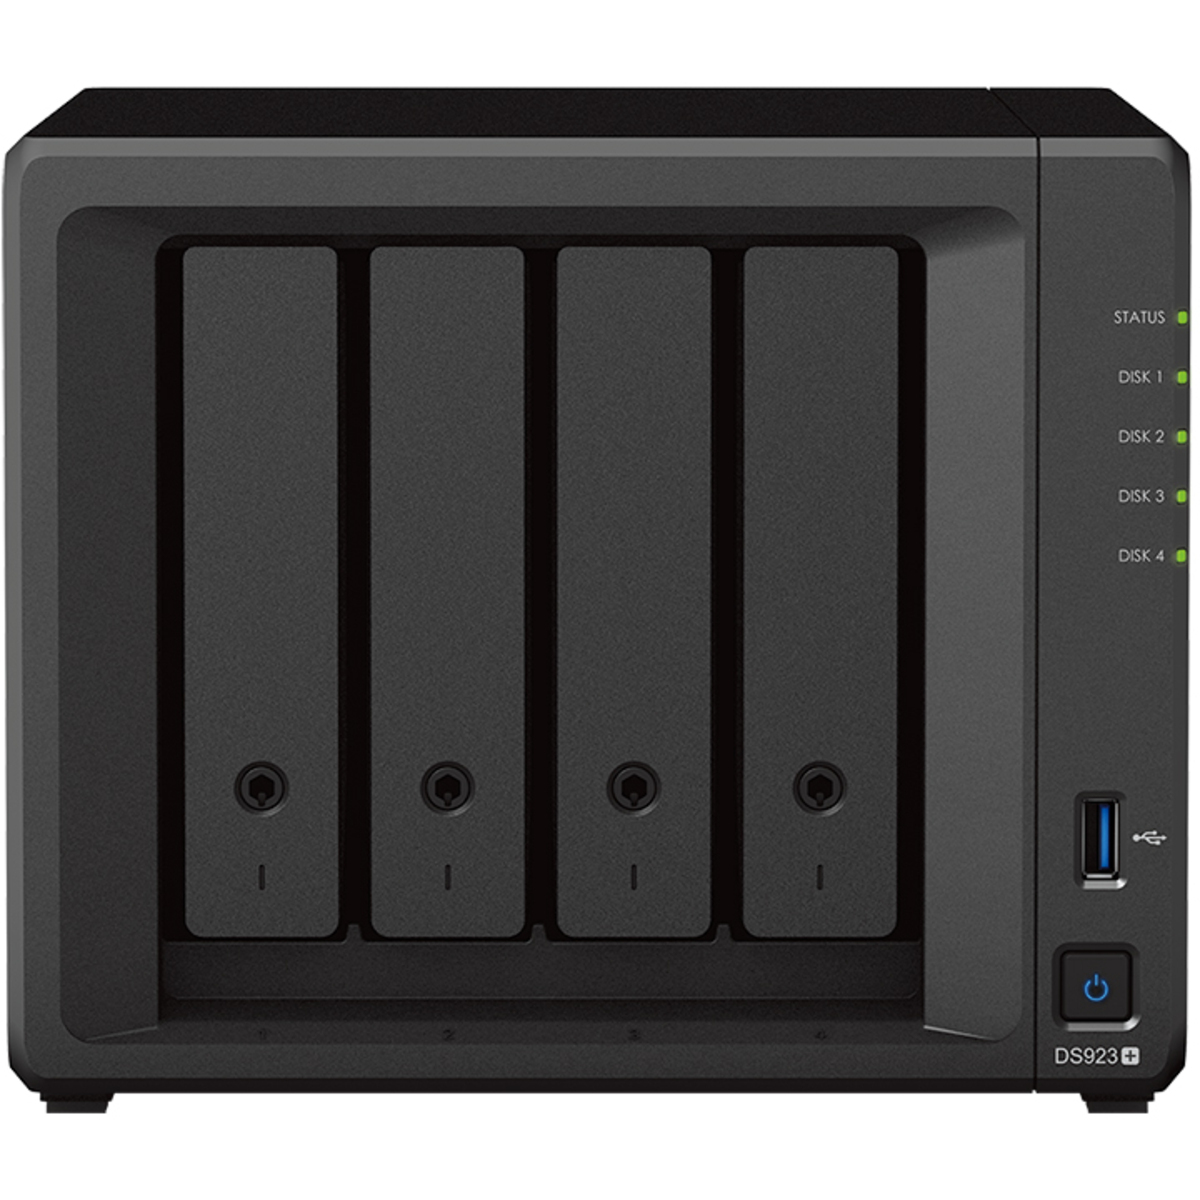 Synology DiskStation DS923+ 32tb 4-Bay Desktop Multimedia / Power User / Business NAS - Network Attached Storage Device 4x8tb Samsung 870 QVO MZ-77Q8T0 2.5 560/530MB/s SATA 6Gb/s SSD CONSUMER Class Drives Installed - Burn-In Tested - FREE RAM UPGRADE DiskStation DS923+